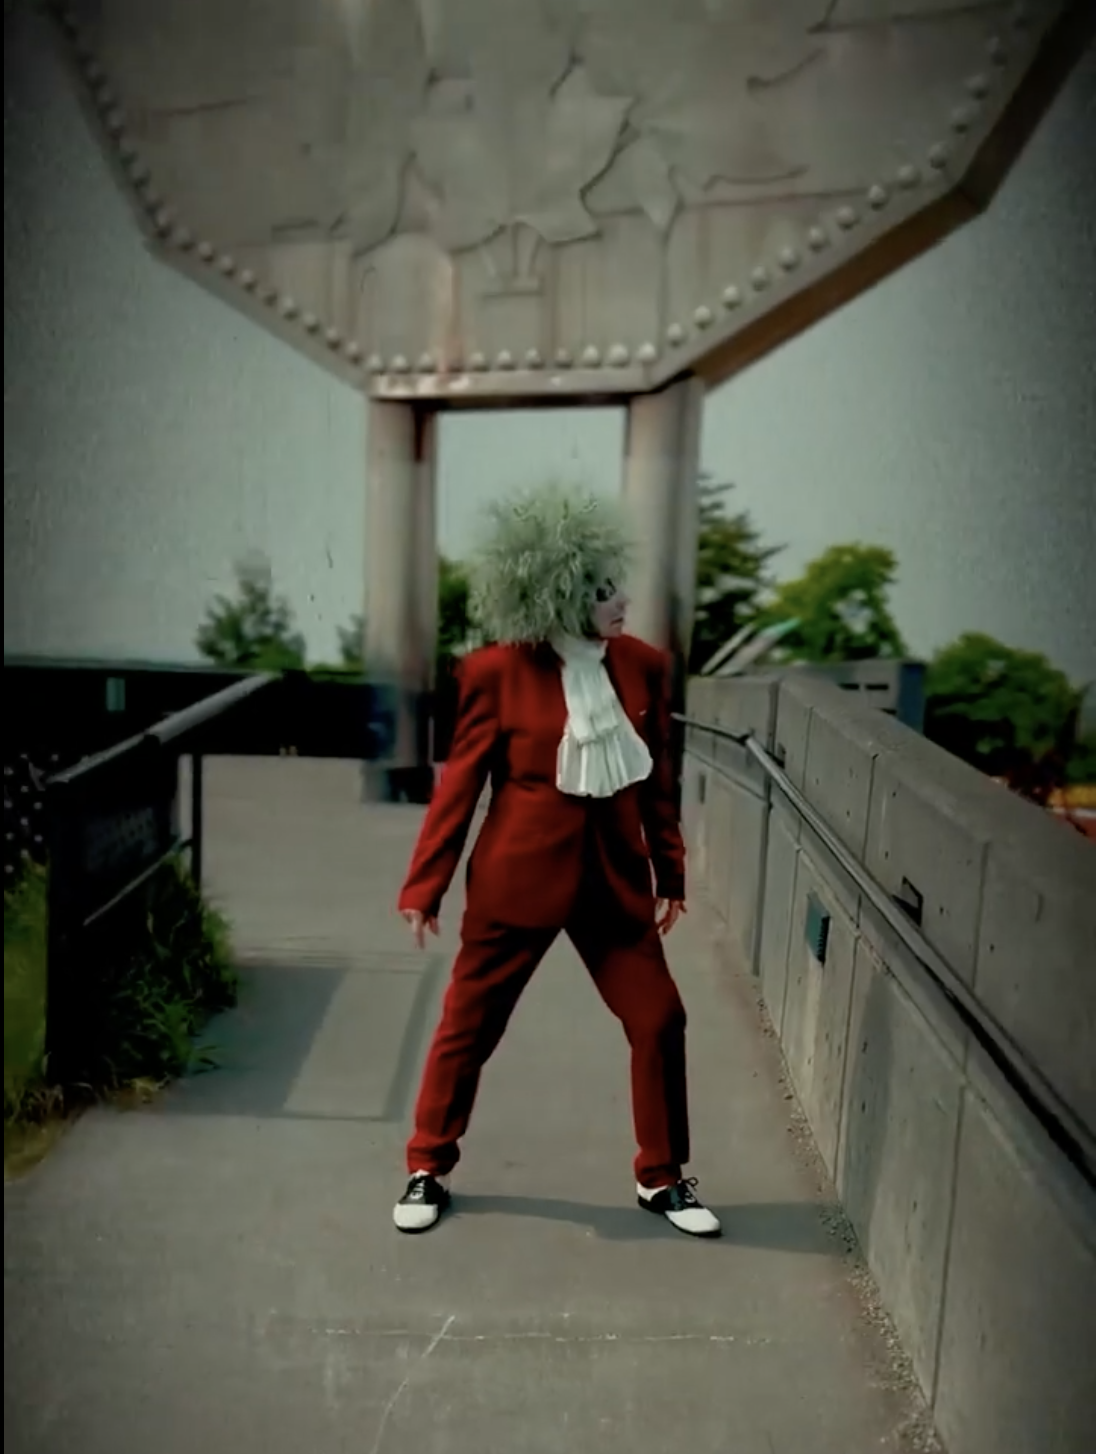 An actor in a red suit, dressed up like the character Beetlejuice, dancing in front of the Sudbury Big Nickel statue